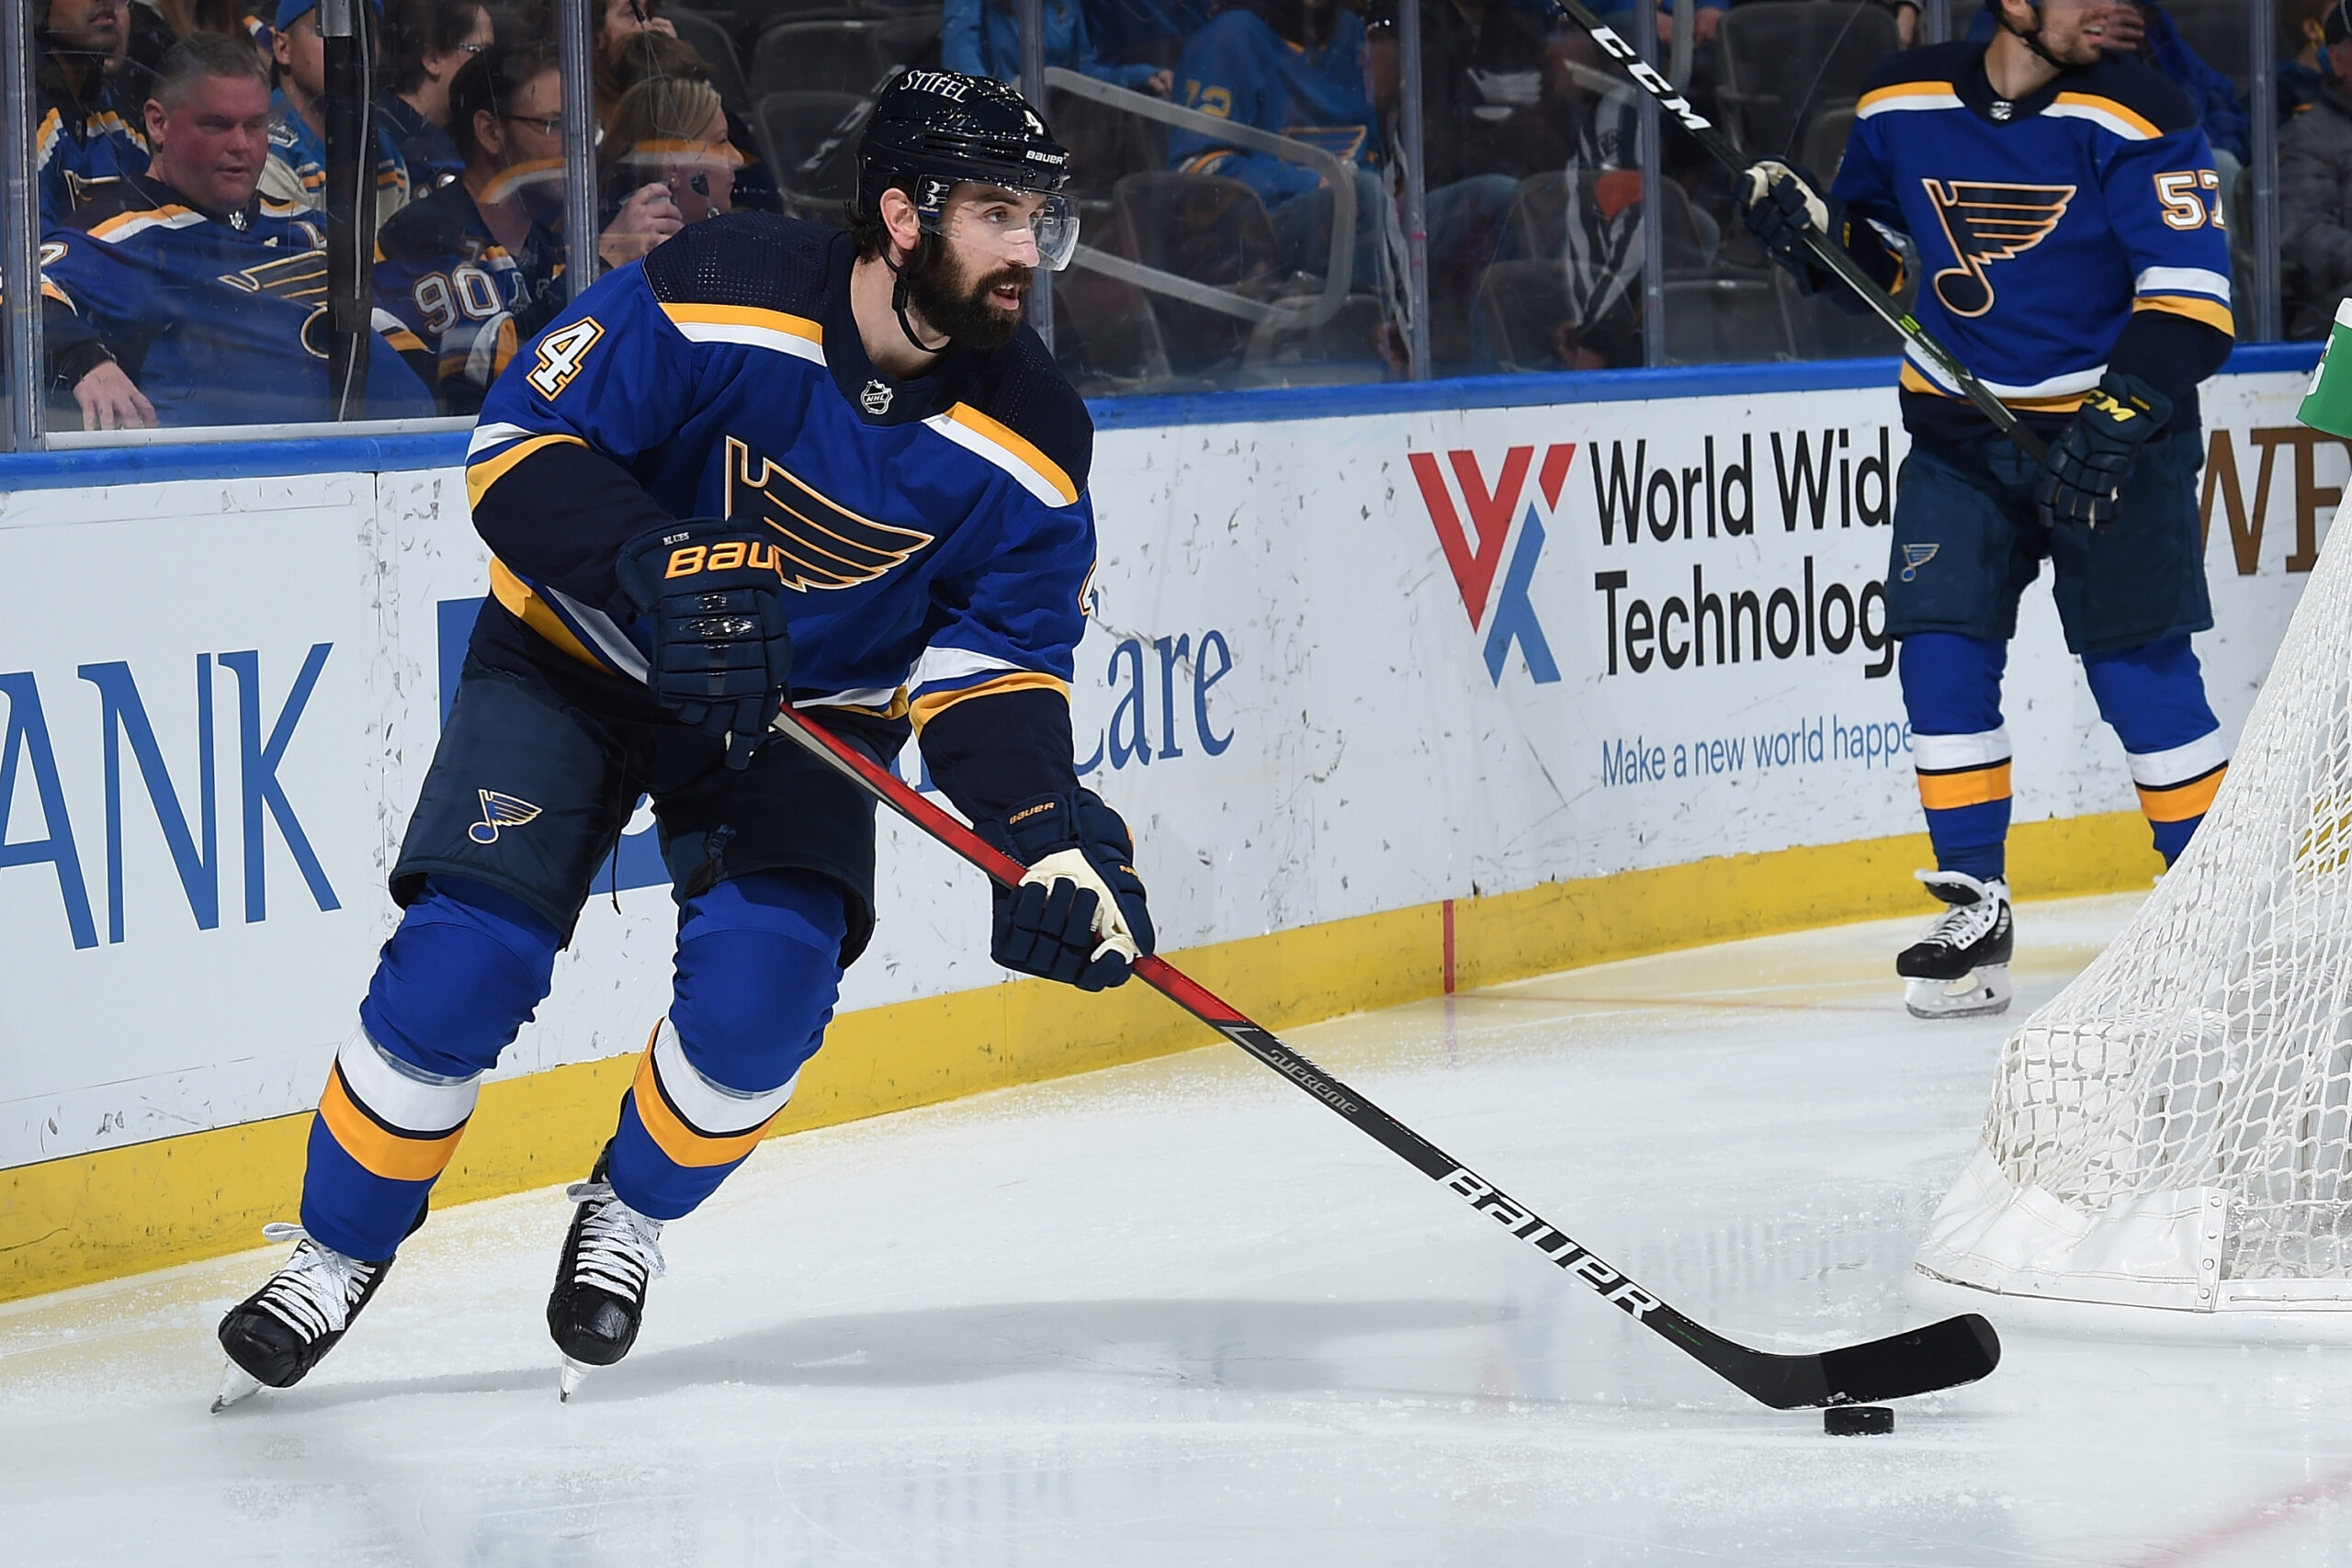 St. Louis Blues - The feeling is mutual! Watch today's interview with Blues  defenseman Marco Scandella